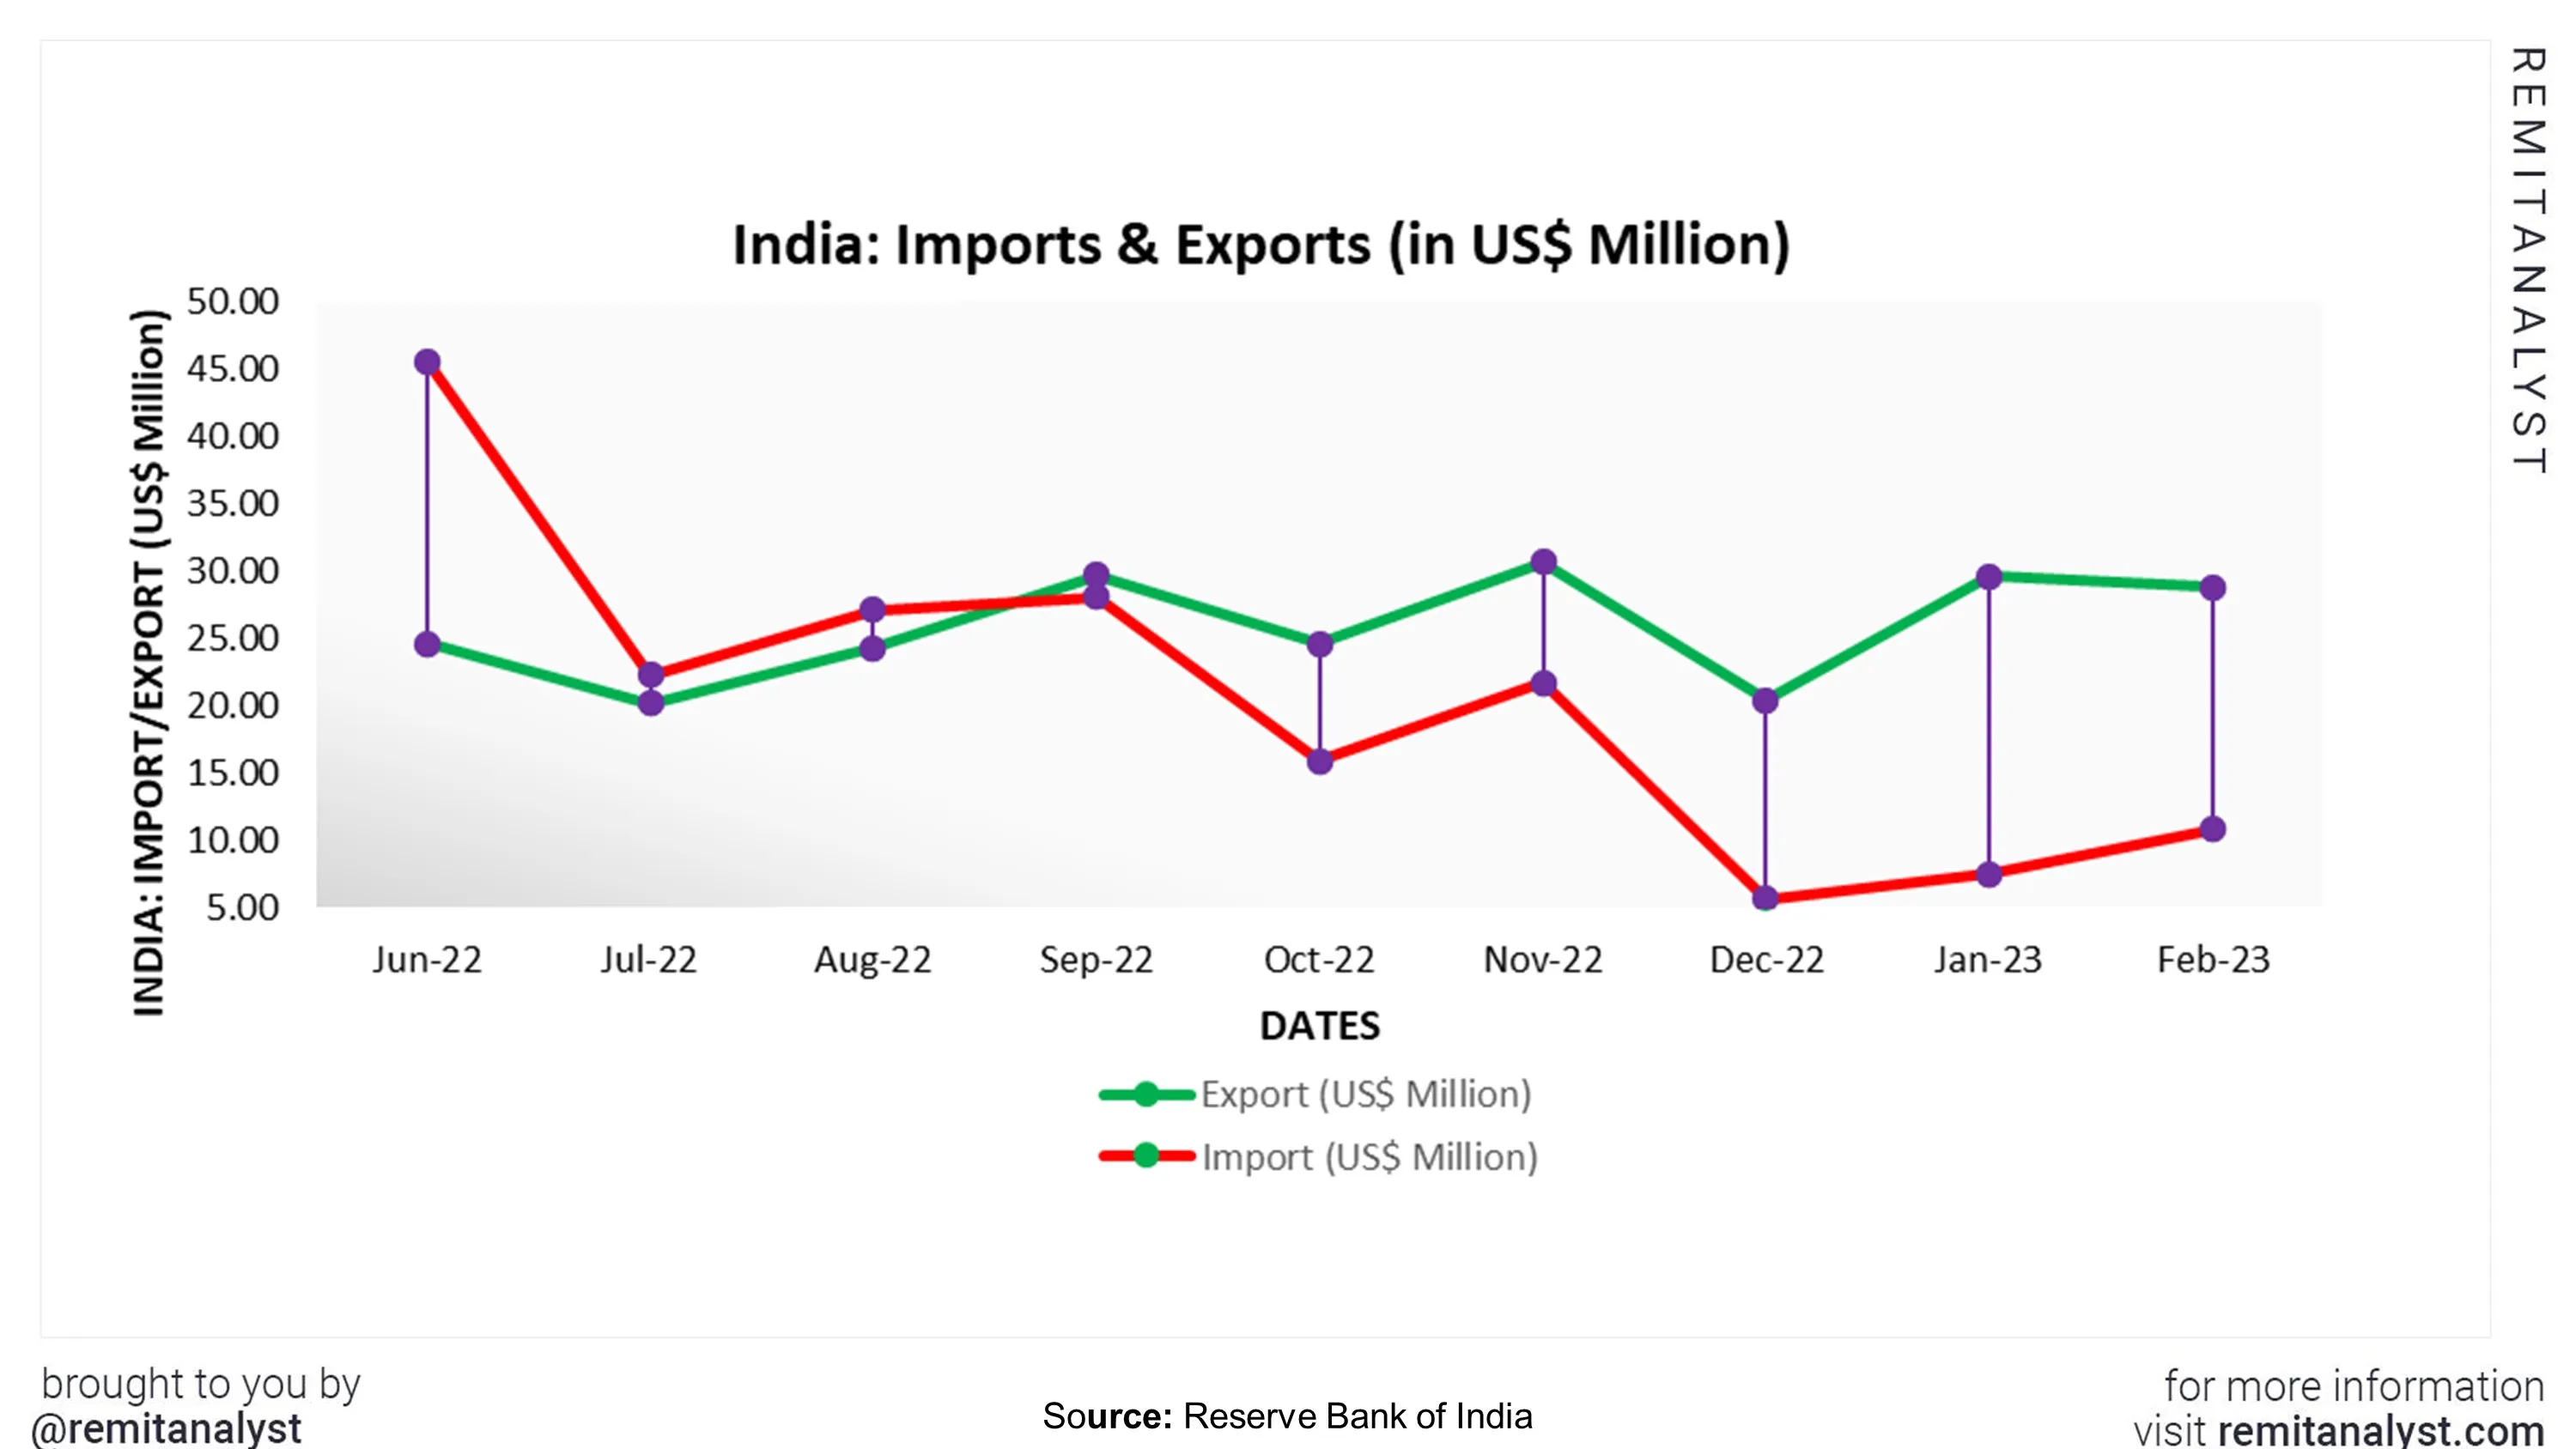 india-import-export-from-jun-2022-to-feb-2023